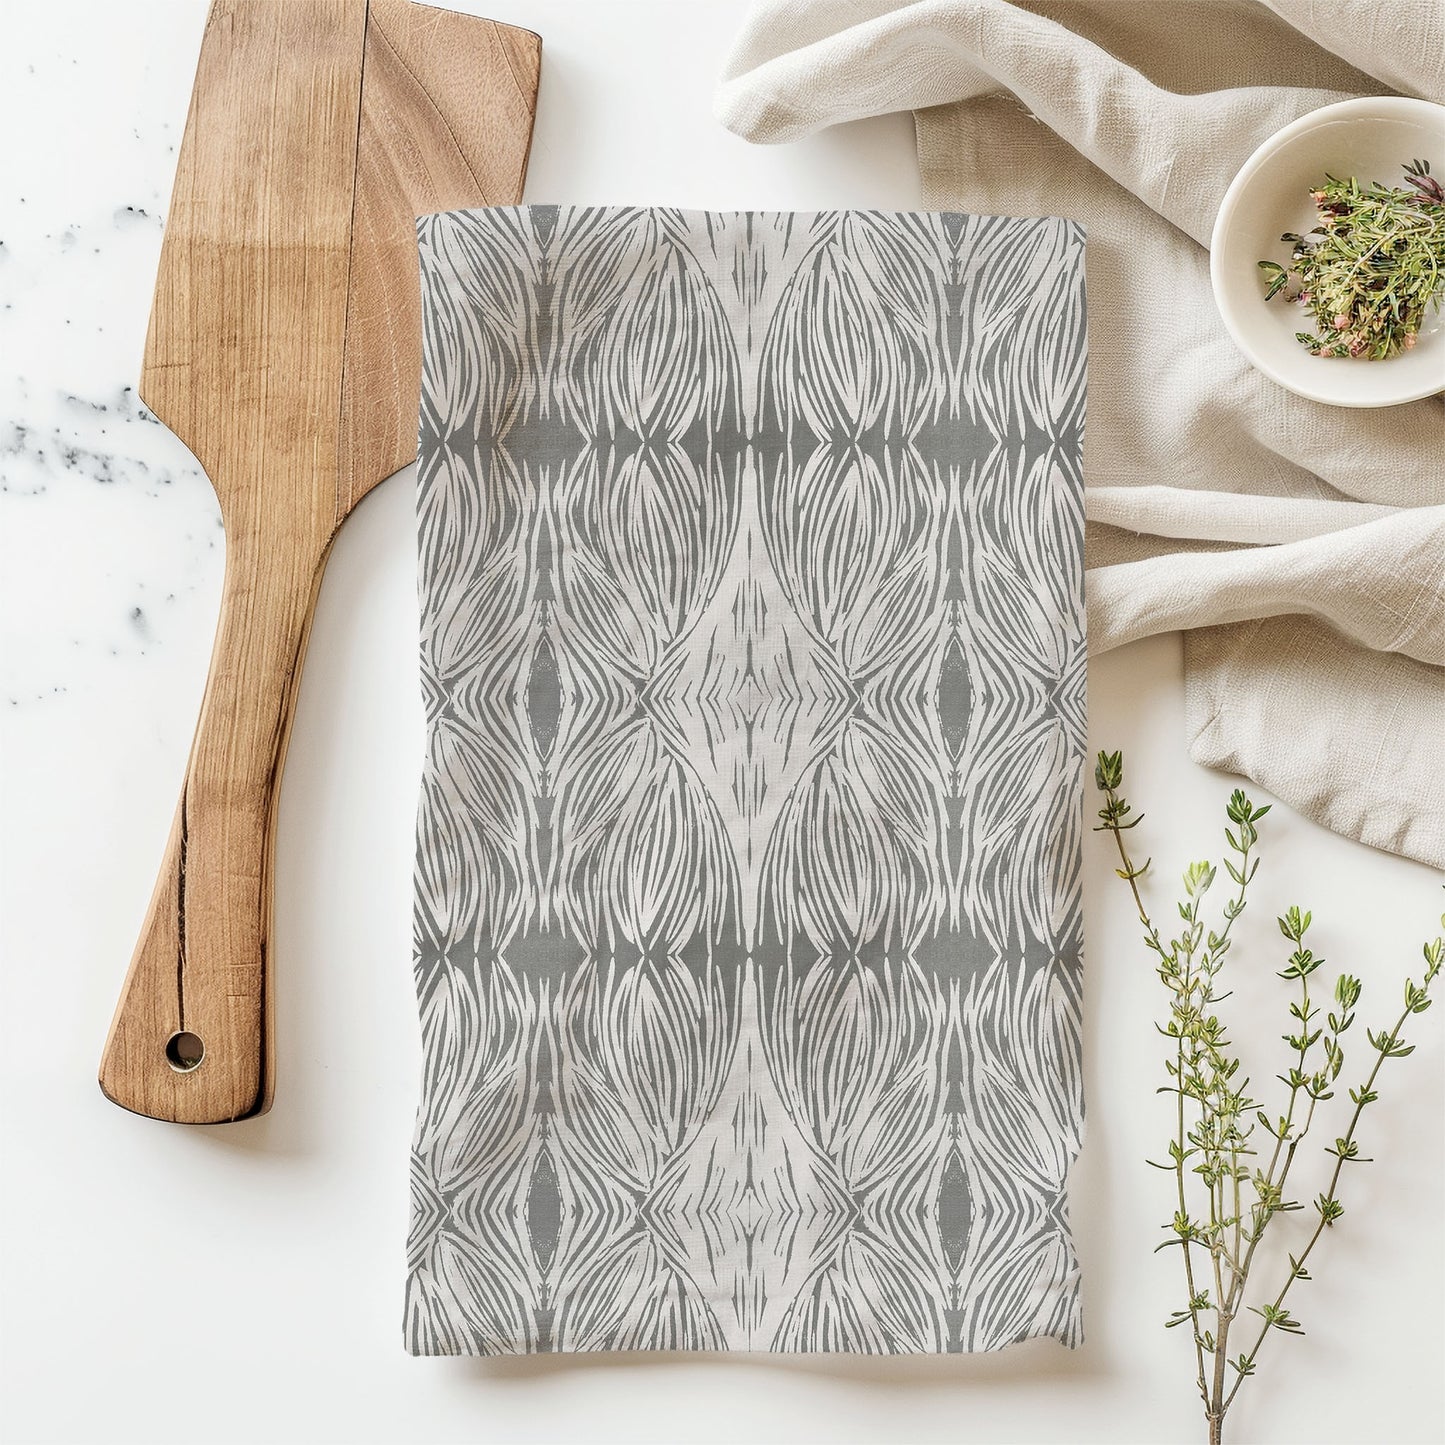 Flour sack tea towel featuring a gray and beige abstract pattern